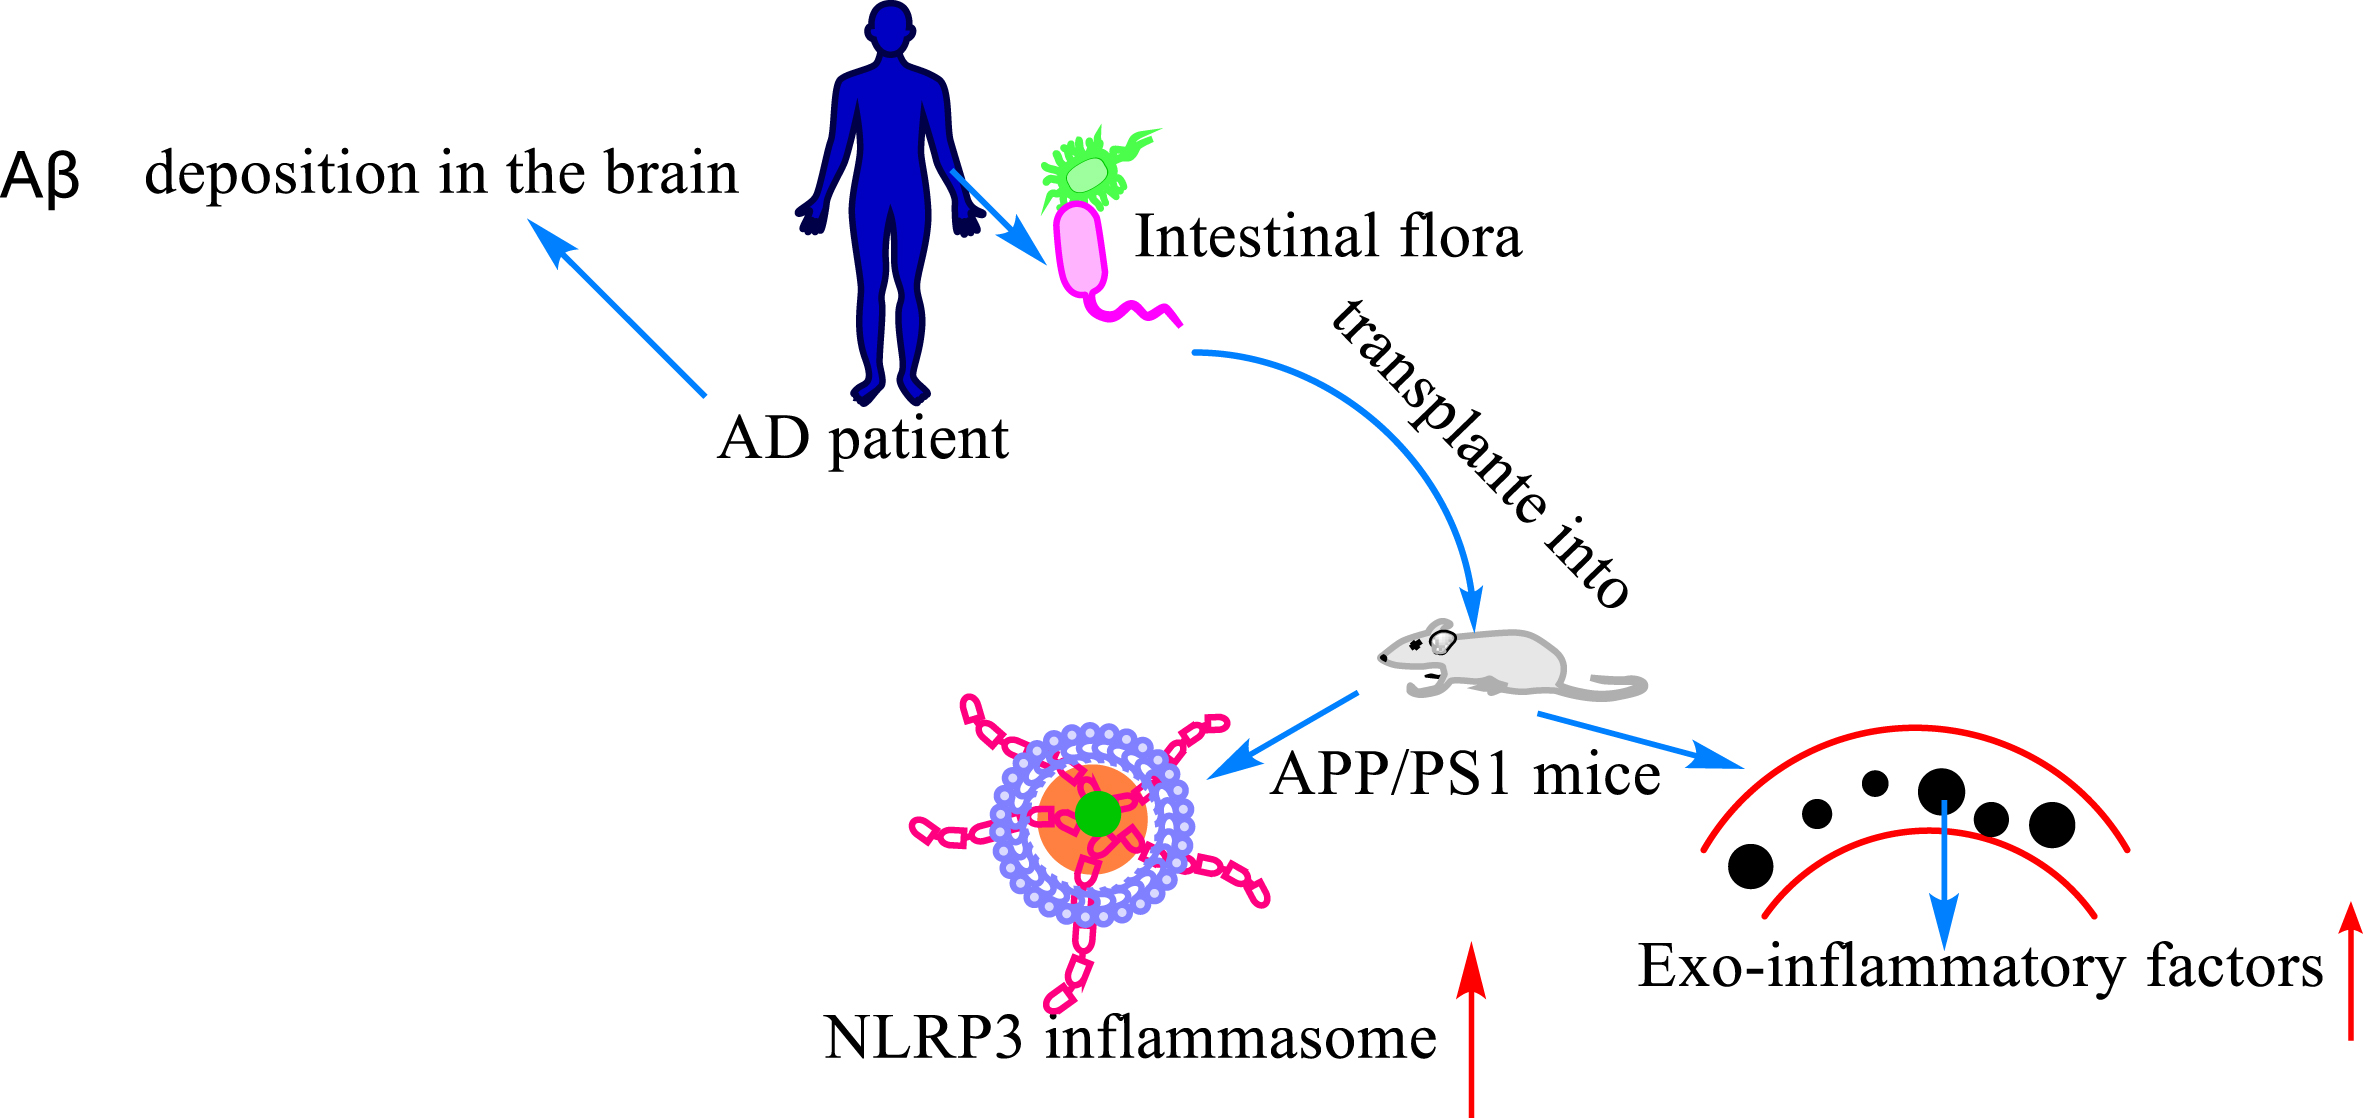 Relationship between Aβ, gut flora, and neuroinflammation. Deposition of Aβ in the brain is one of the hallmarks of AD. The expression level of inflammasome and inflammatory factors was increased in the peripheral blood after transplanting the intestinal flora of AD patients into APP/PS1 mice.